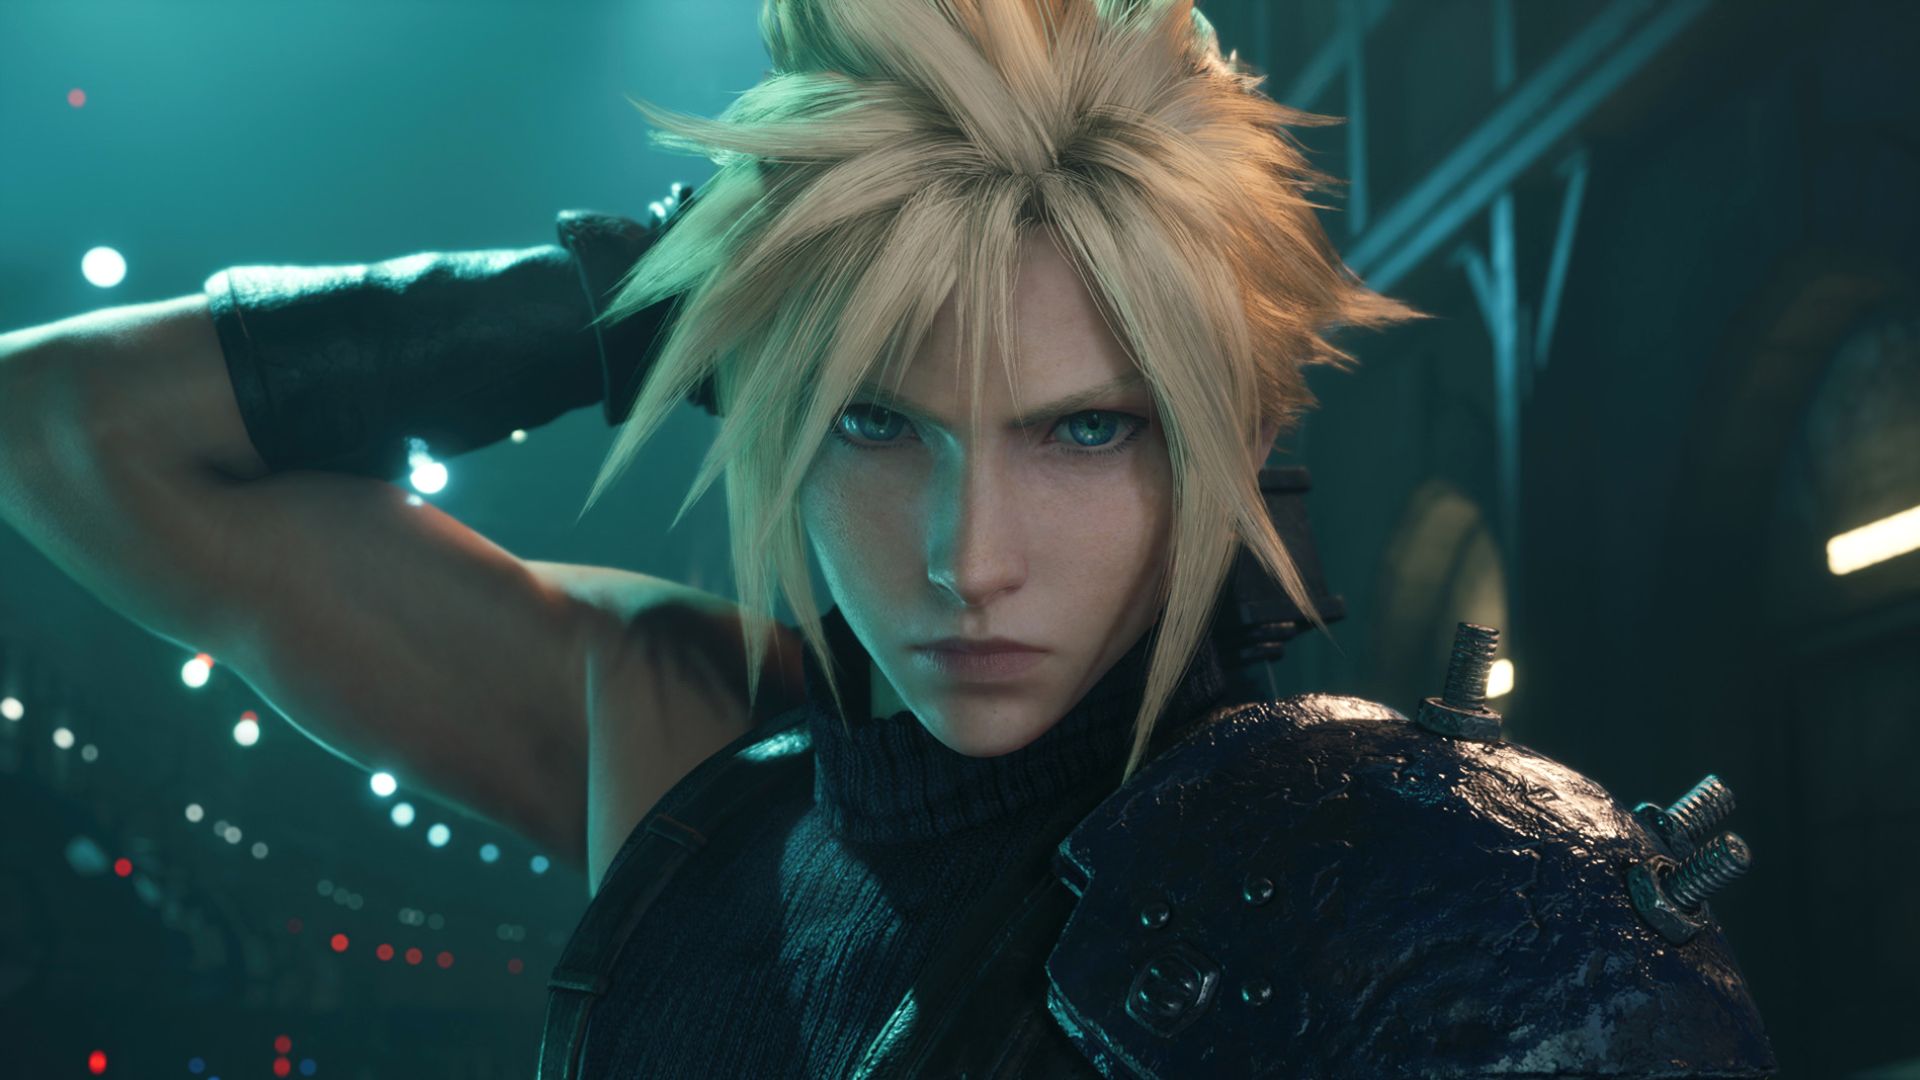 Final Fantasy 7 Remake Part 2 – How Long Are We Going to Have to Wait for